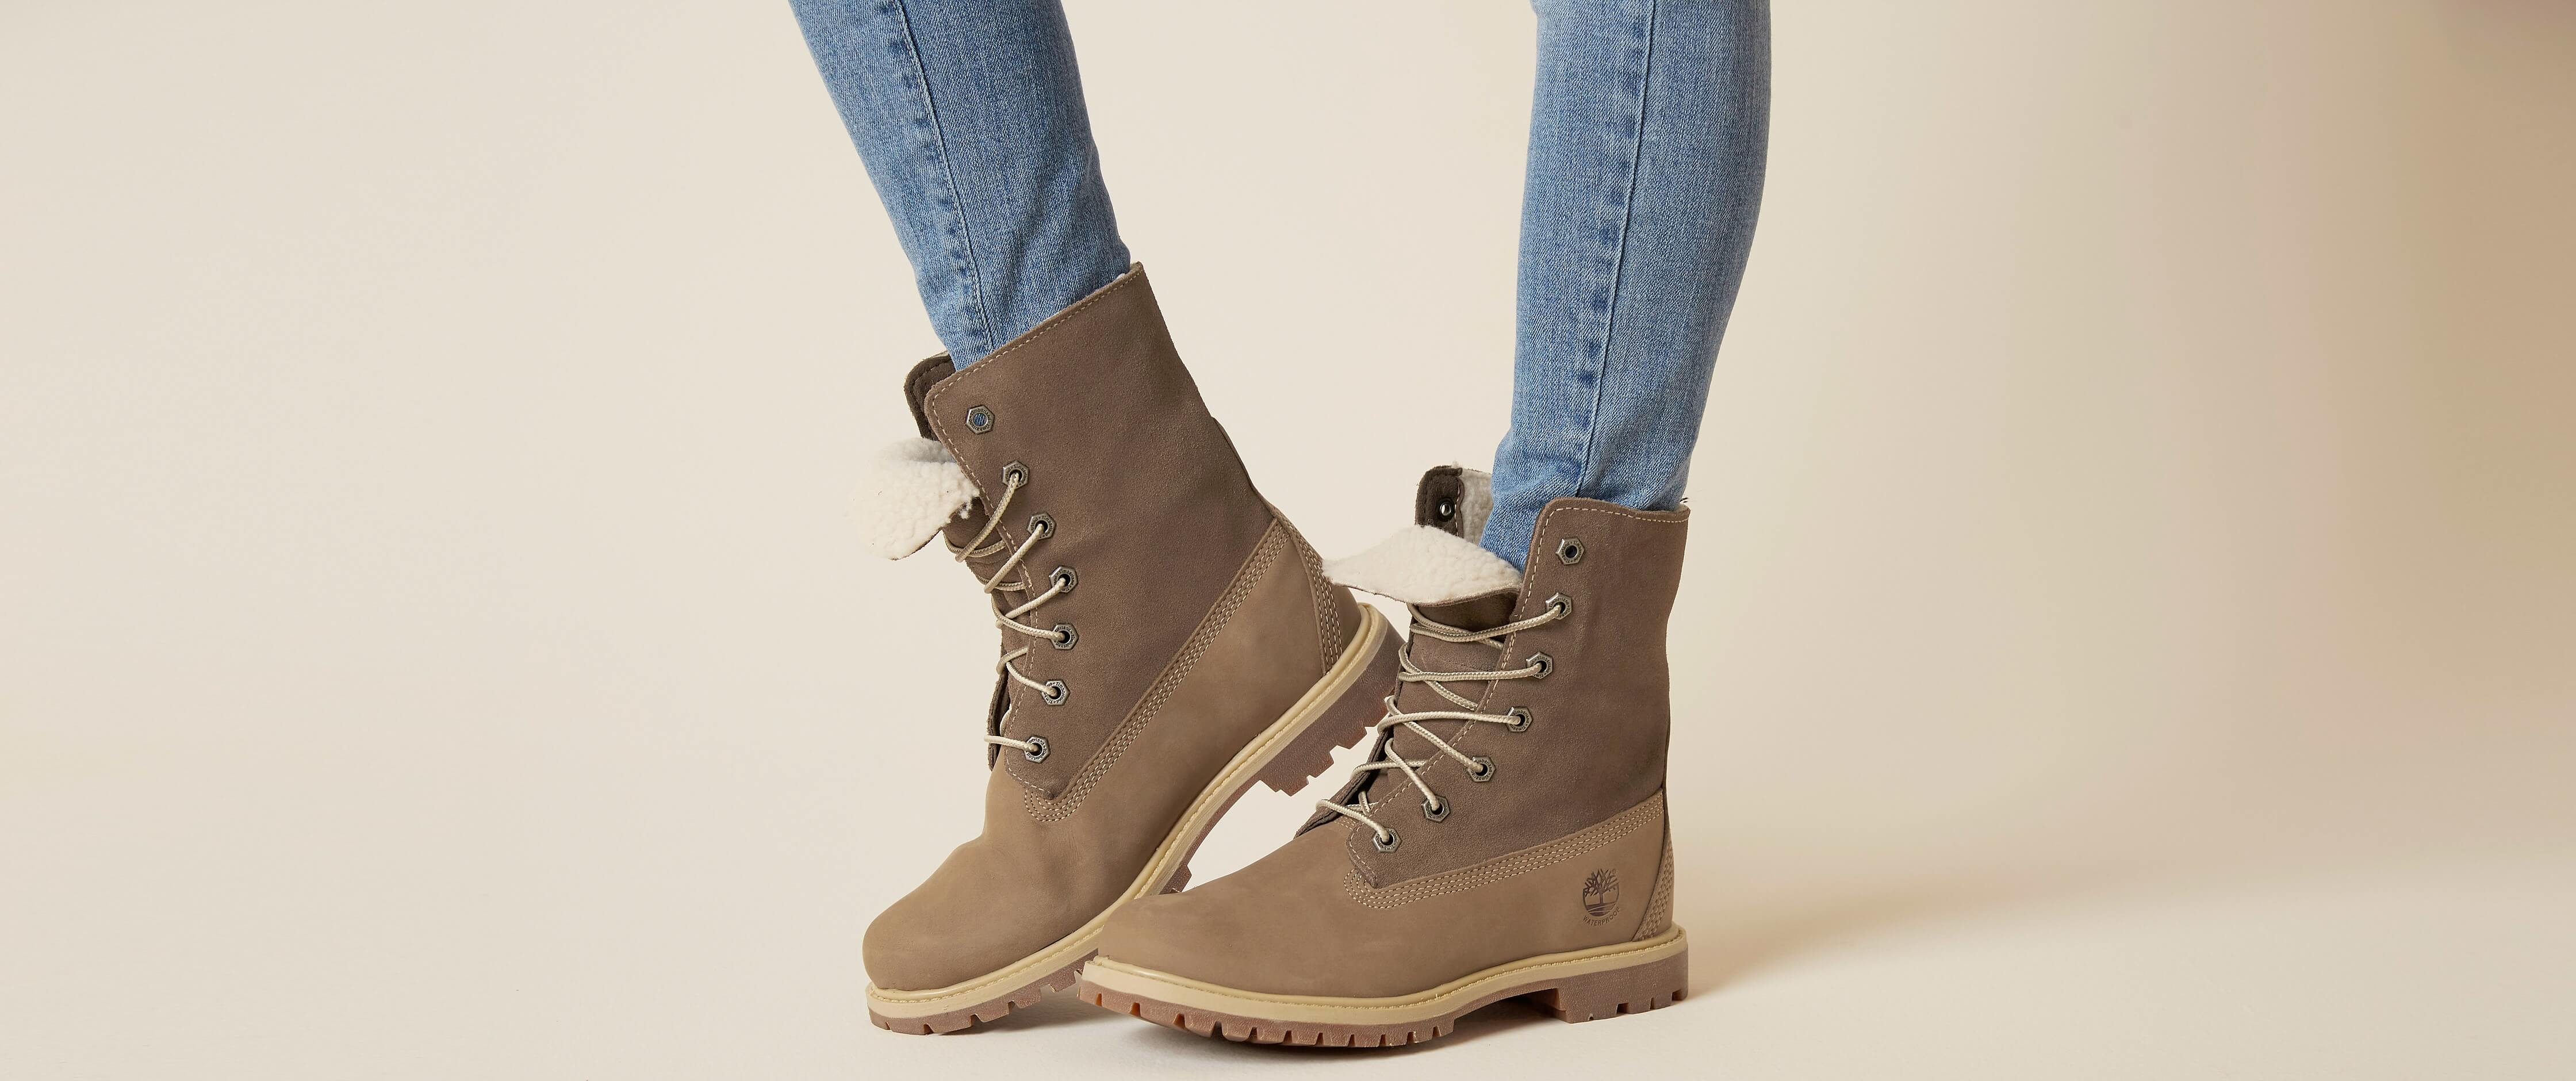 Timberland Teddy Leather Boot - Women's 